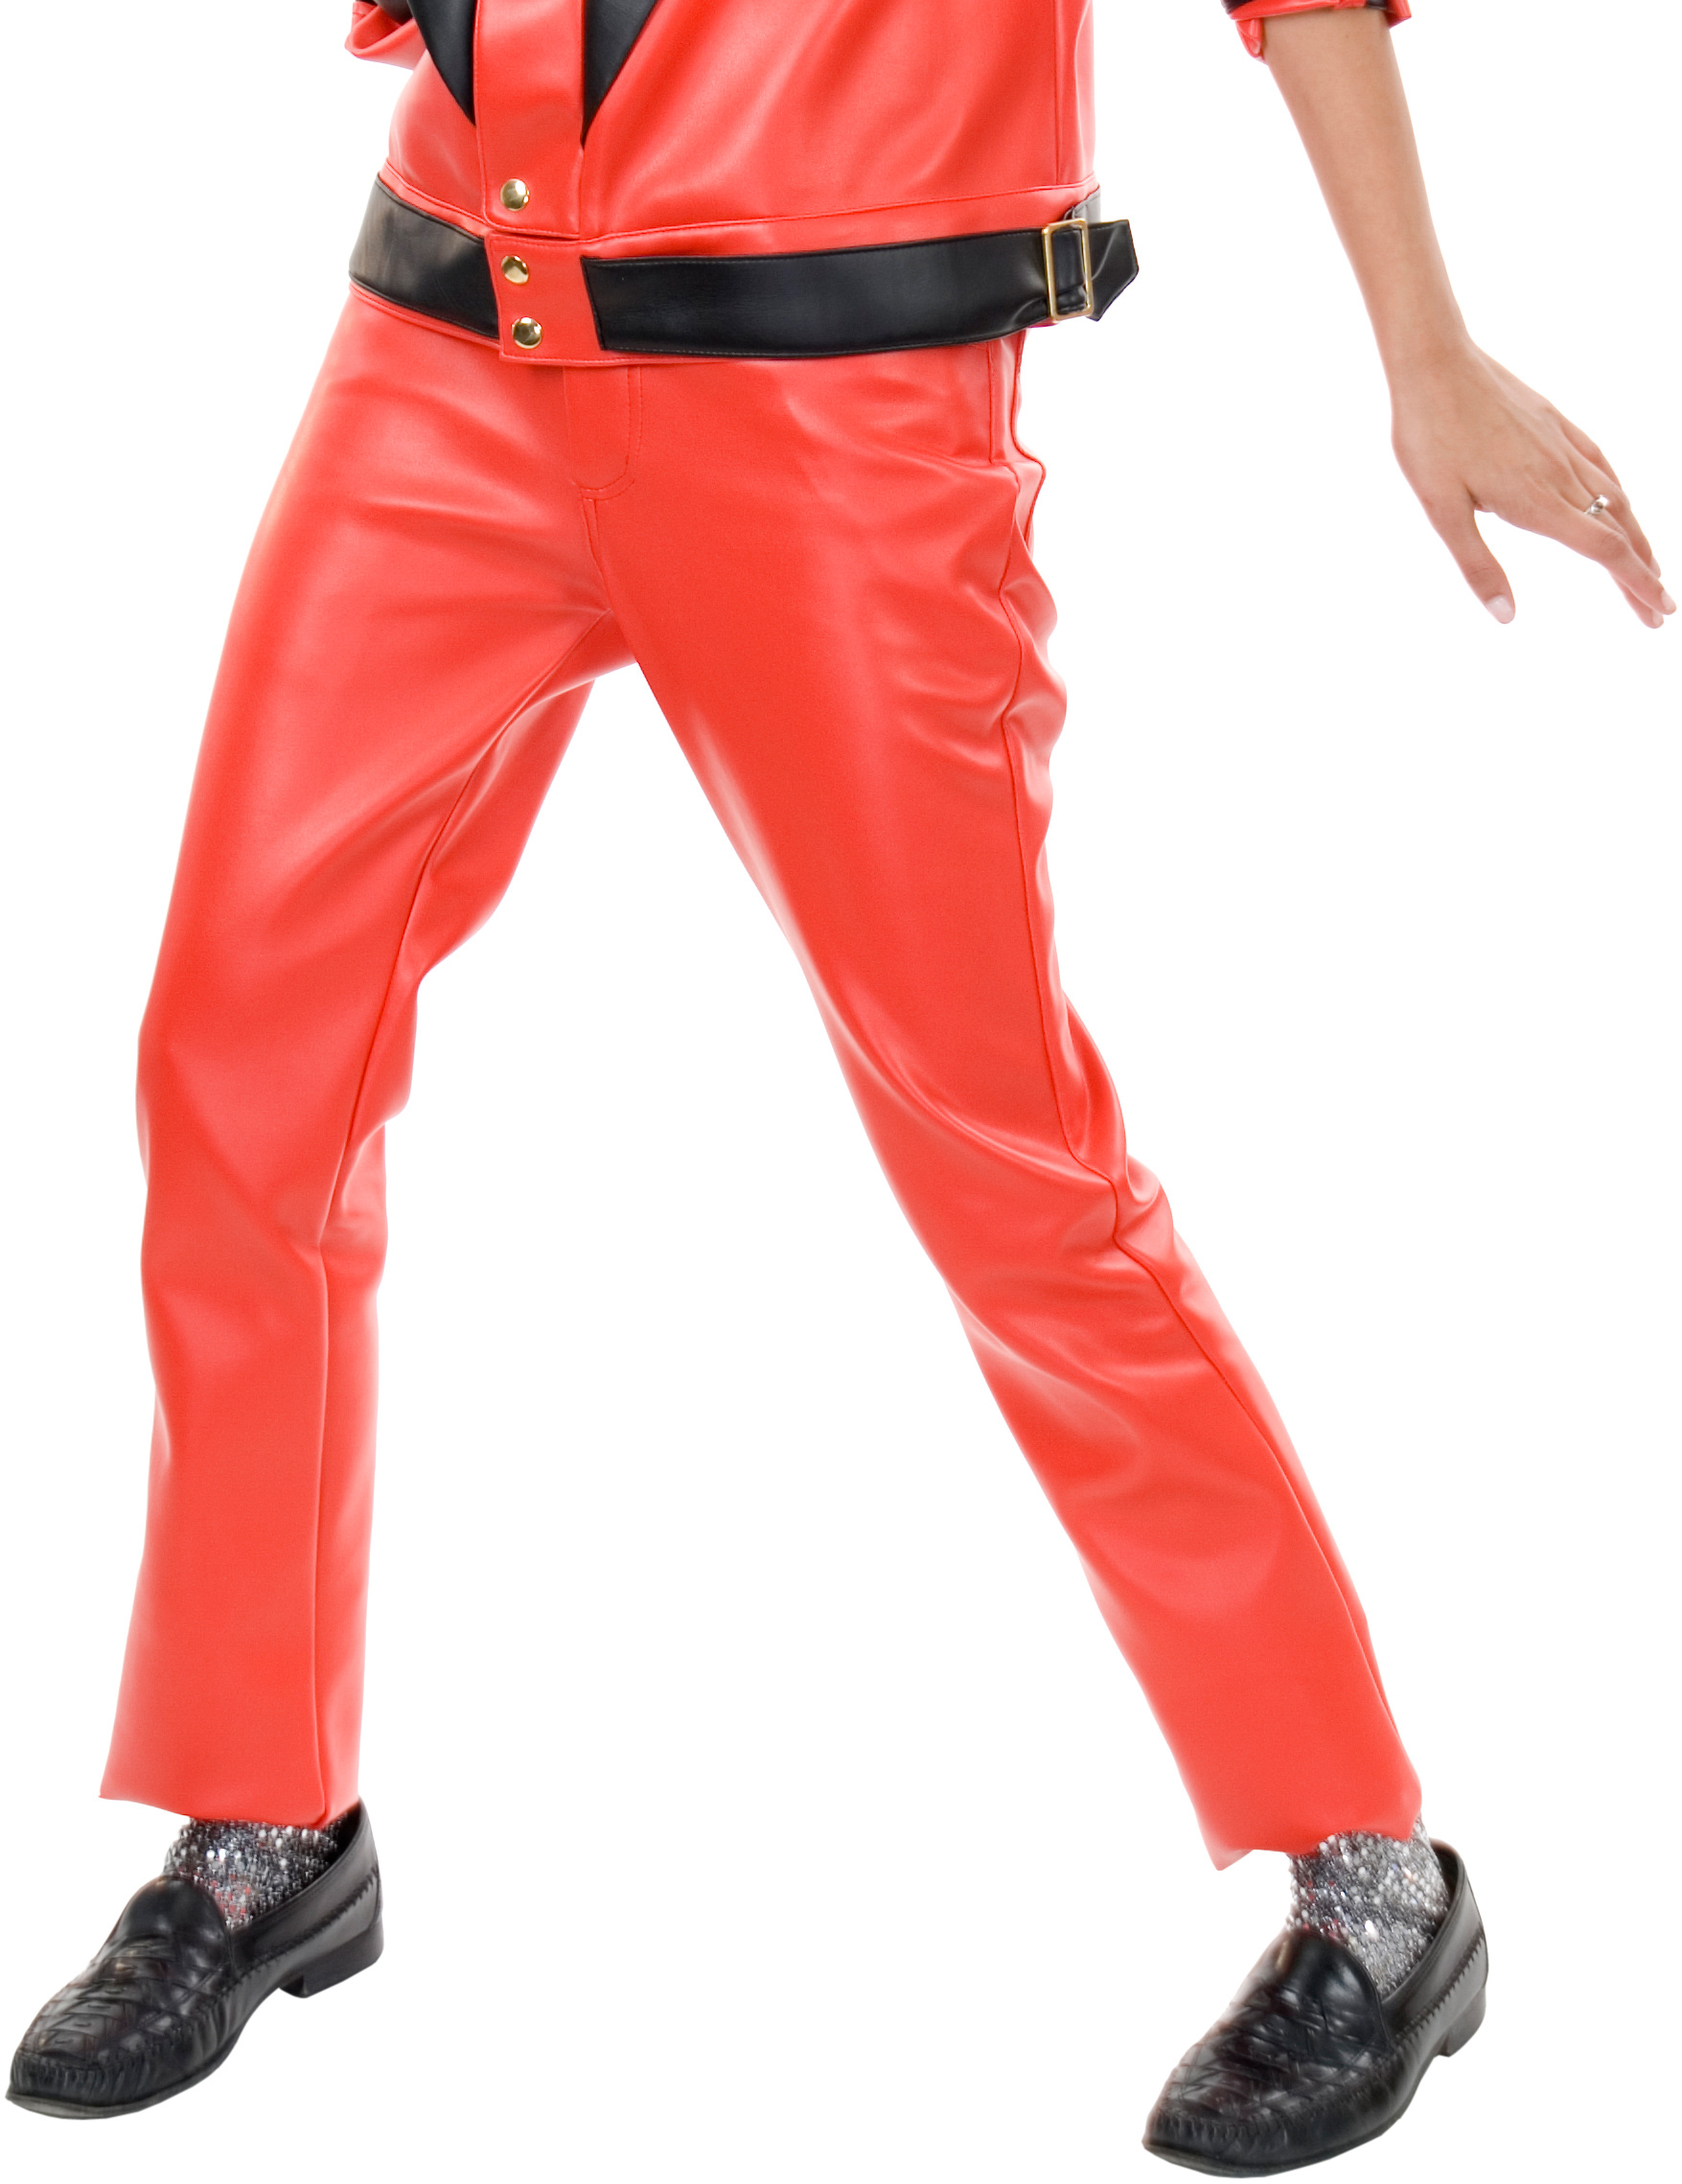 Charades Costumes Men's Red Leather Pants Adult Costume - Red - Large (36)